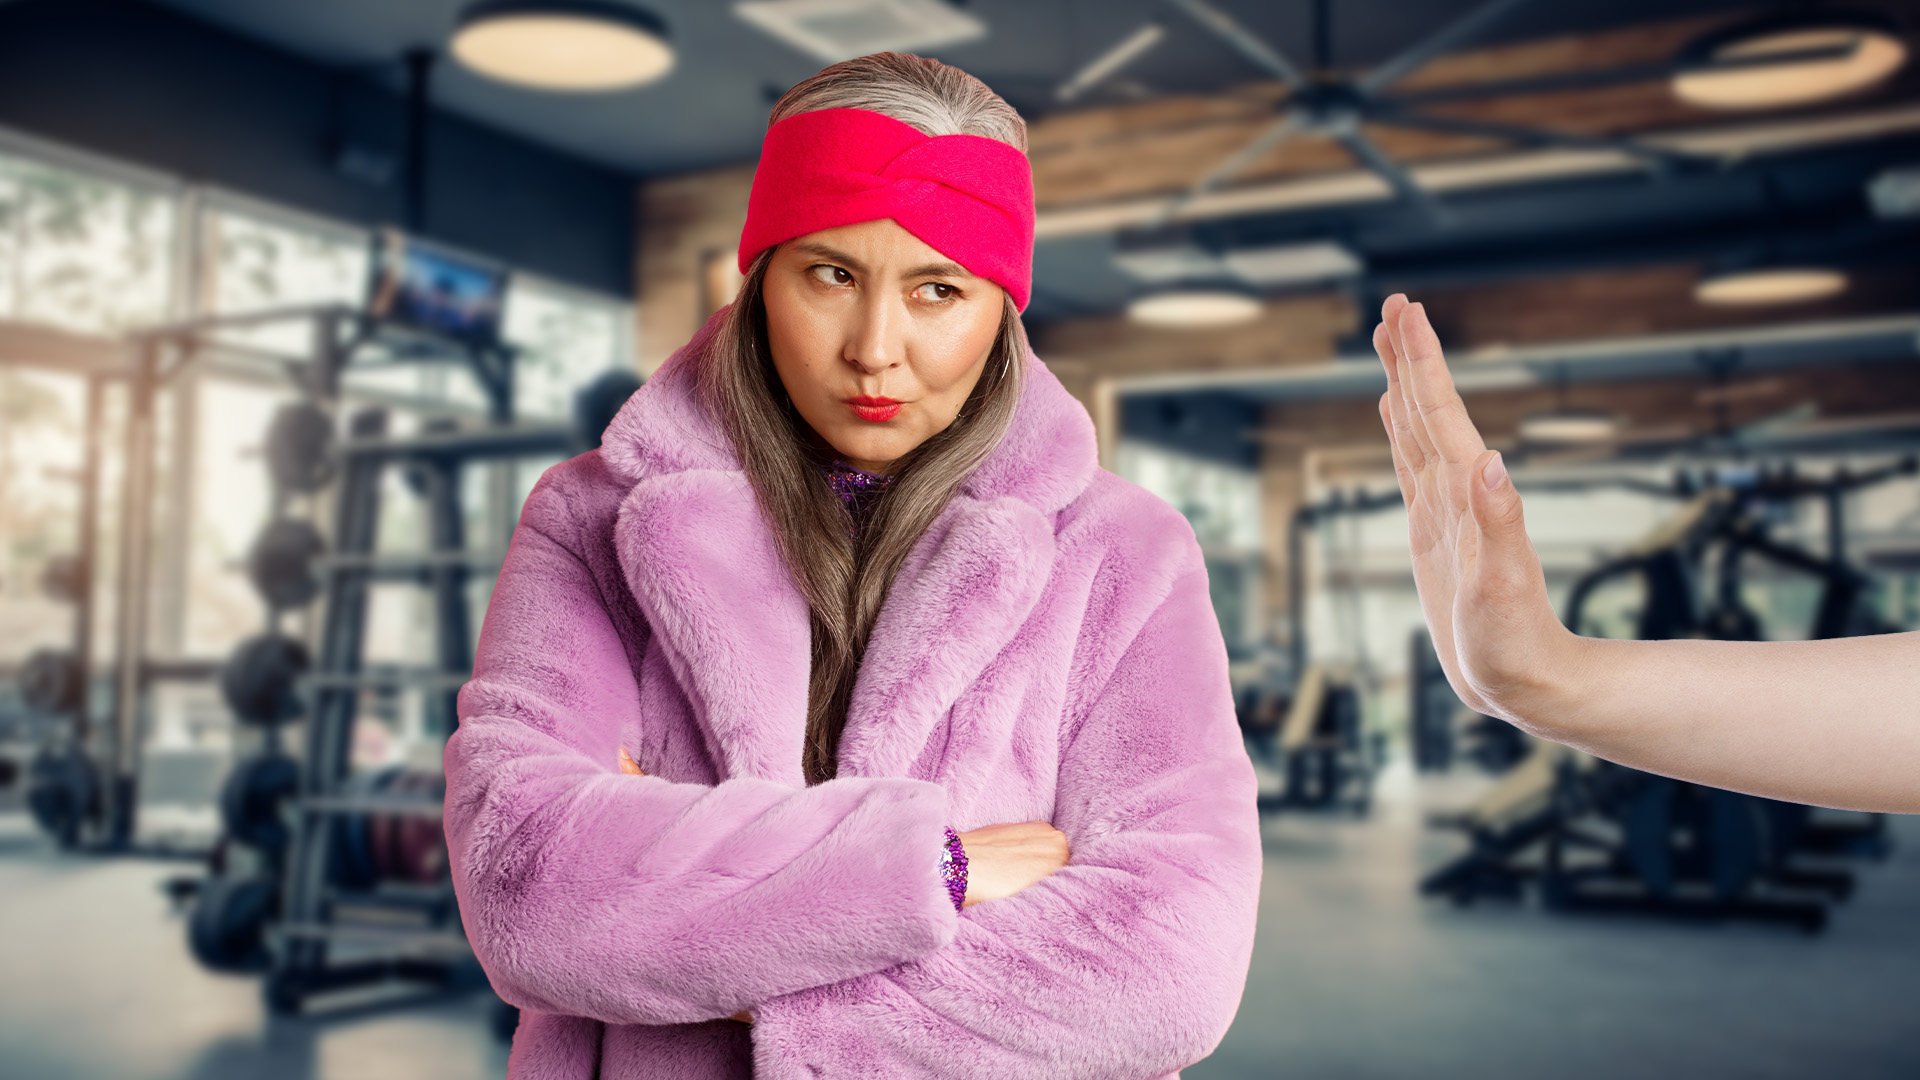 A South Korean gym has stoked controversy by banning so-called “aunties” from their facility. Photo: SCMP composite/Shutterstock